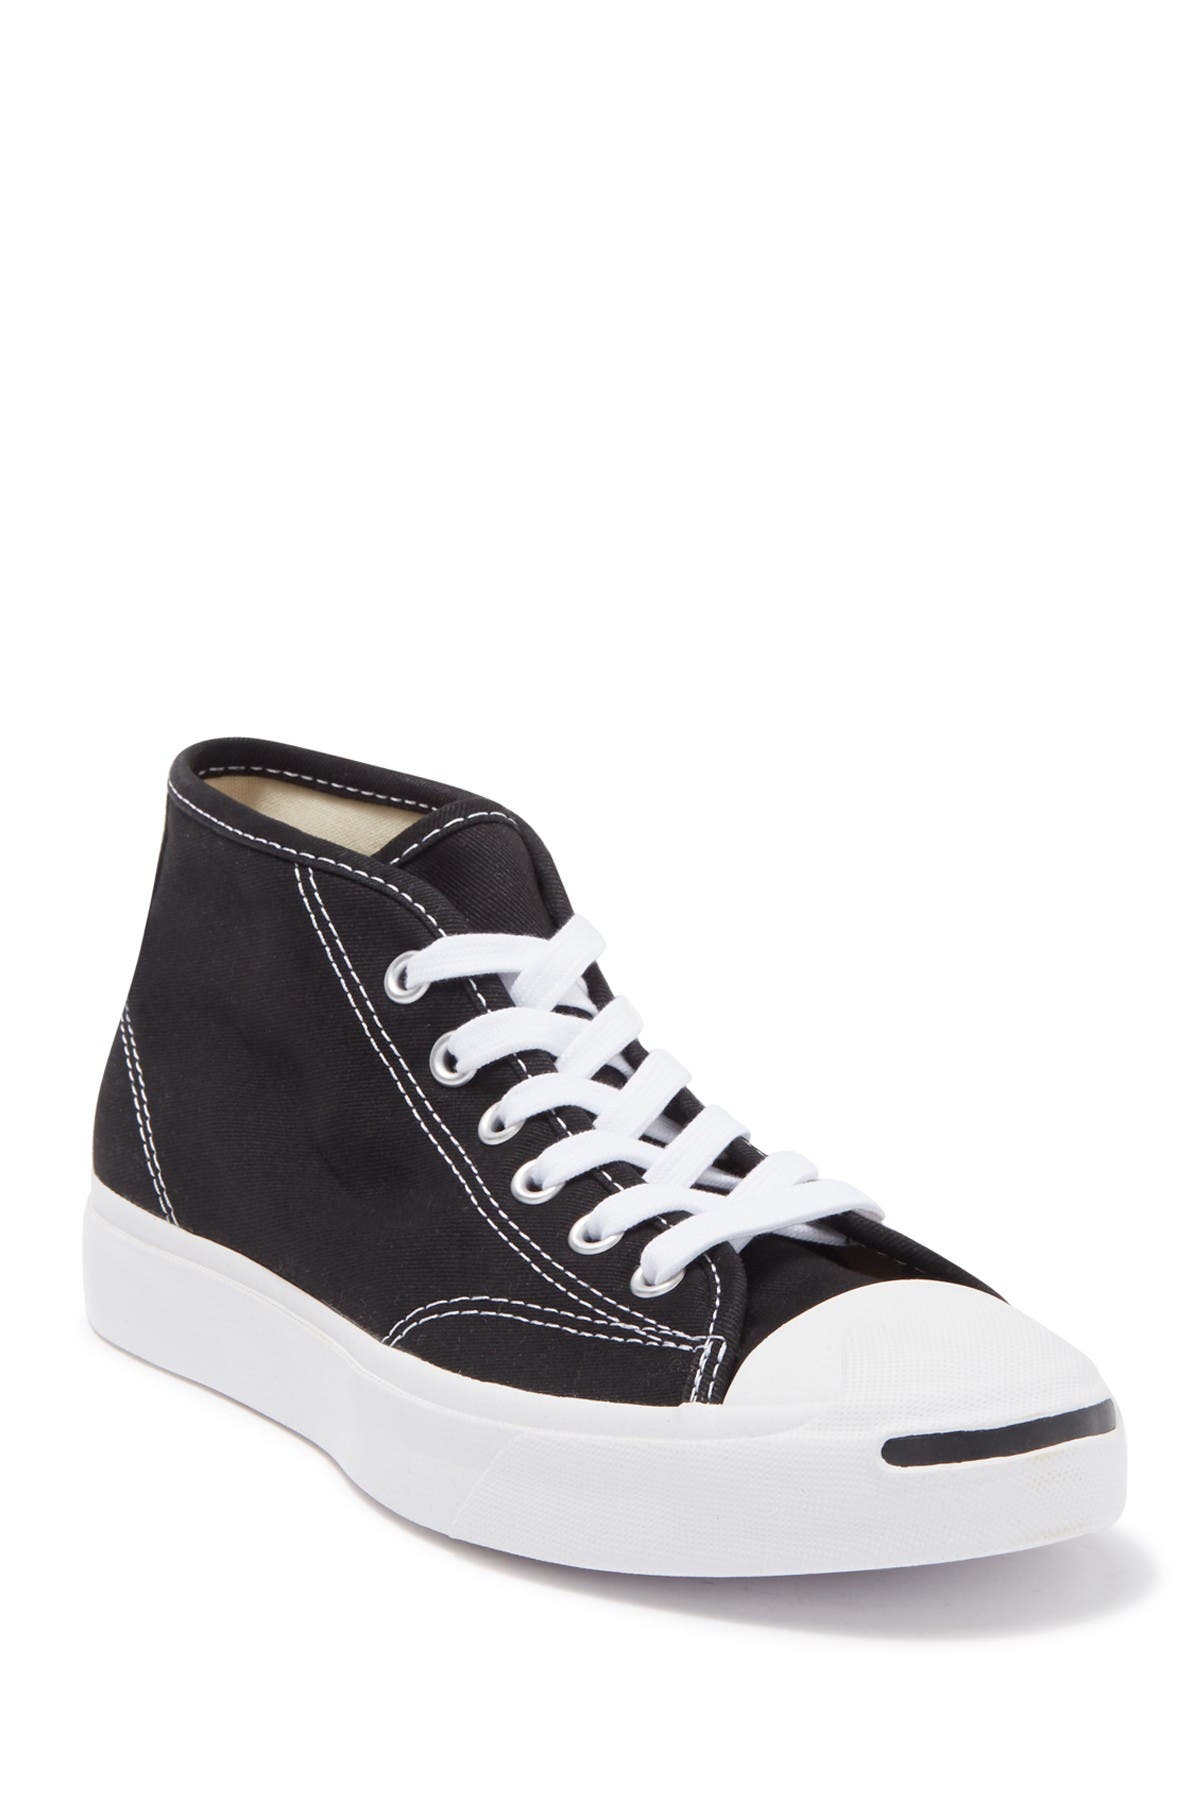 Converse | Jack Purcell Mid Sneaker 